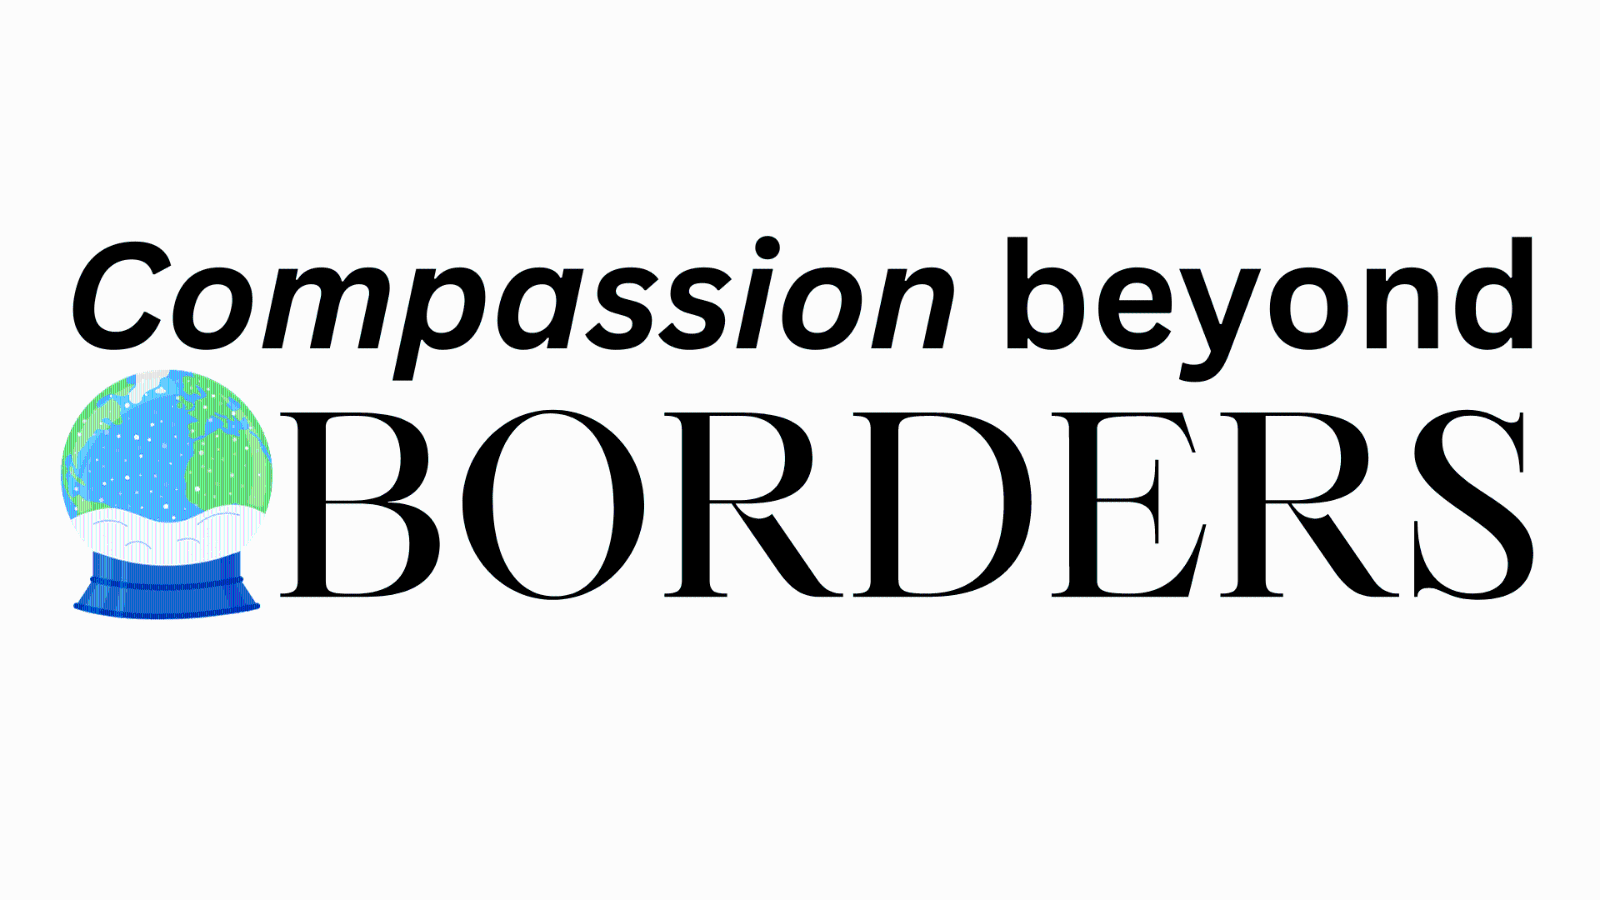 Hope's%20Version%20Compassion%20beyond%20BORDERS%20(1).png